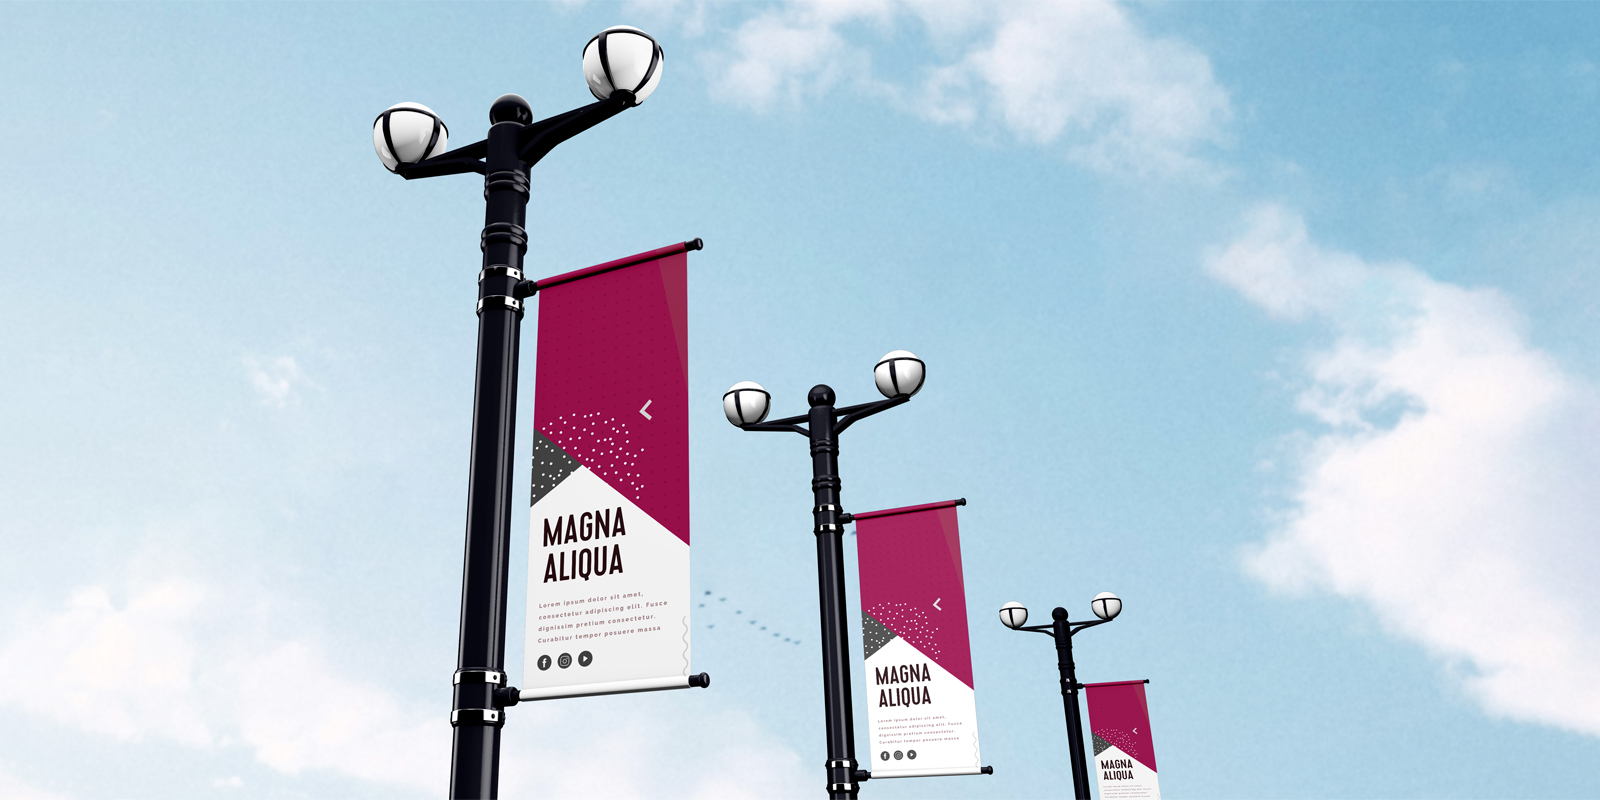 Pole banners in Hobart - Print with Pagerr